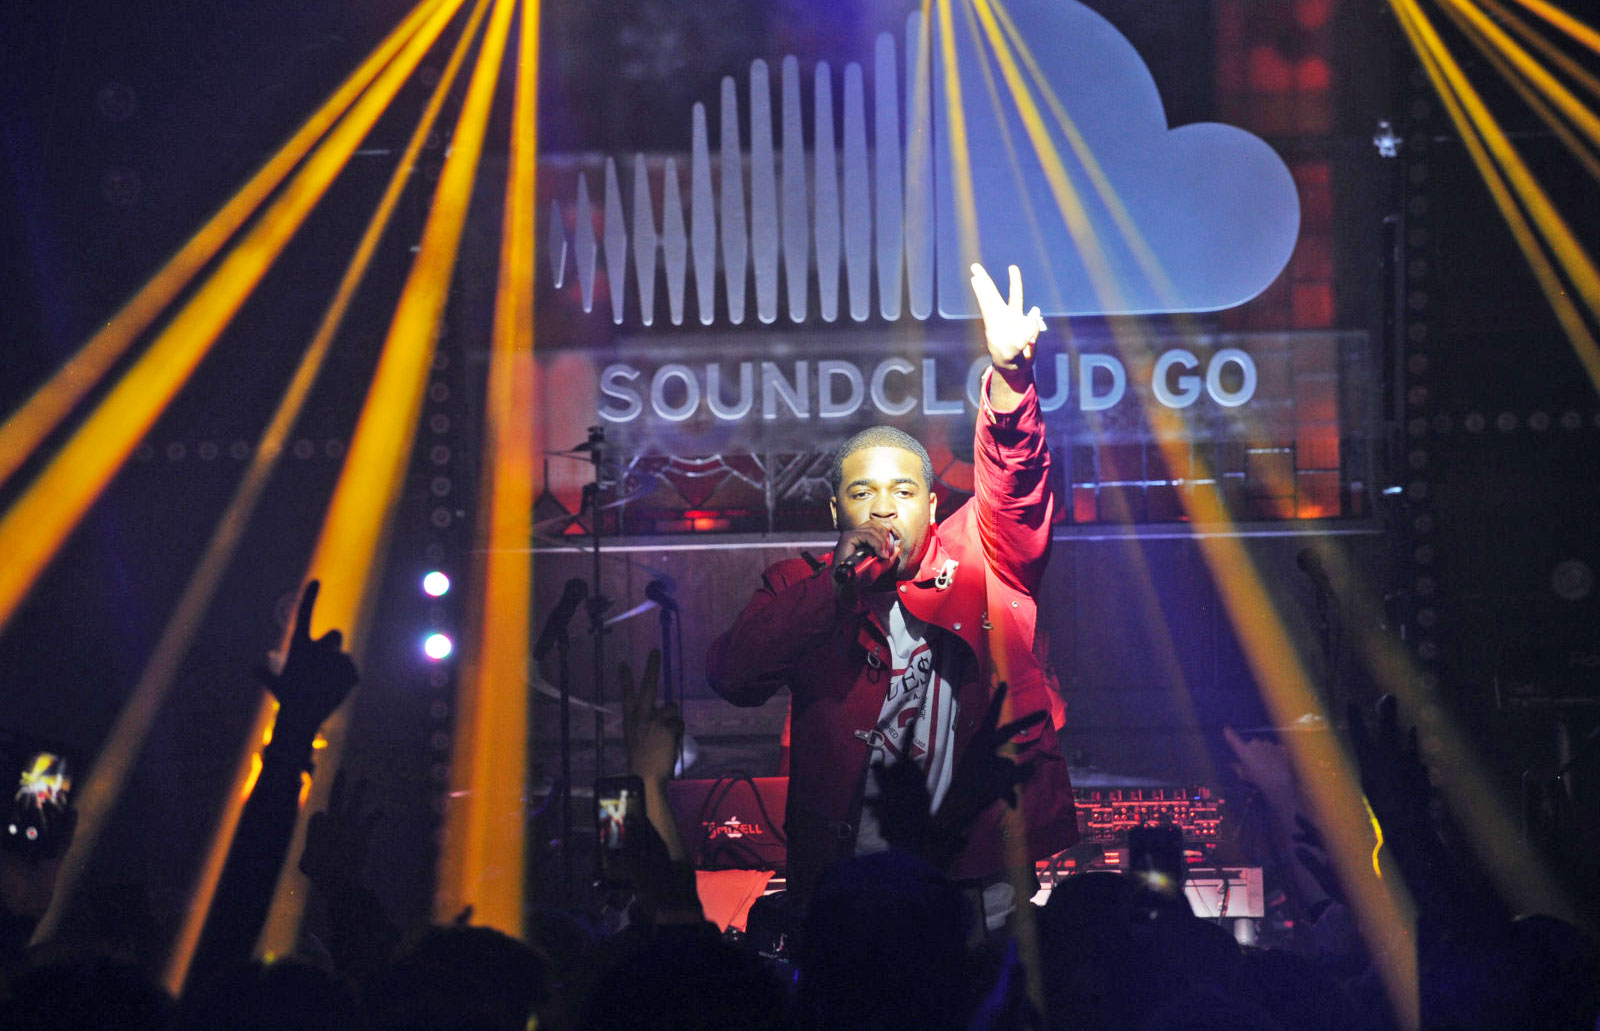 SoundCloud reportedly wants to find a buyer